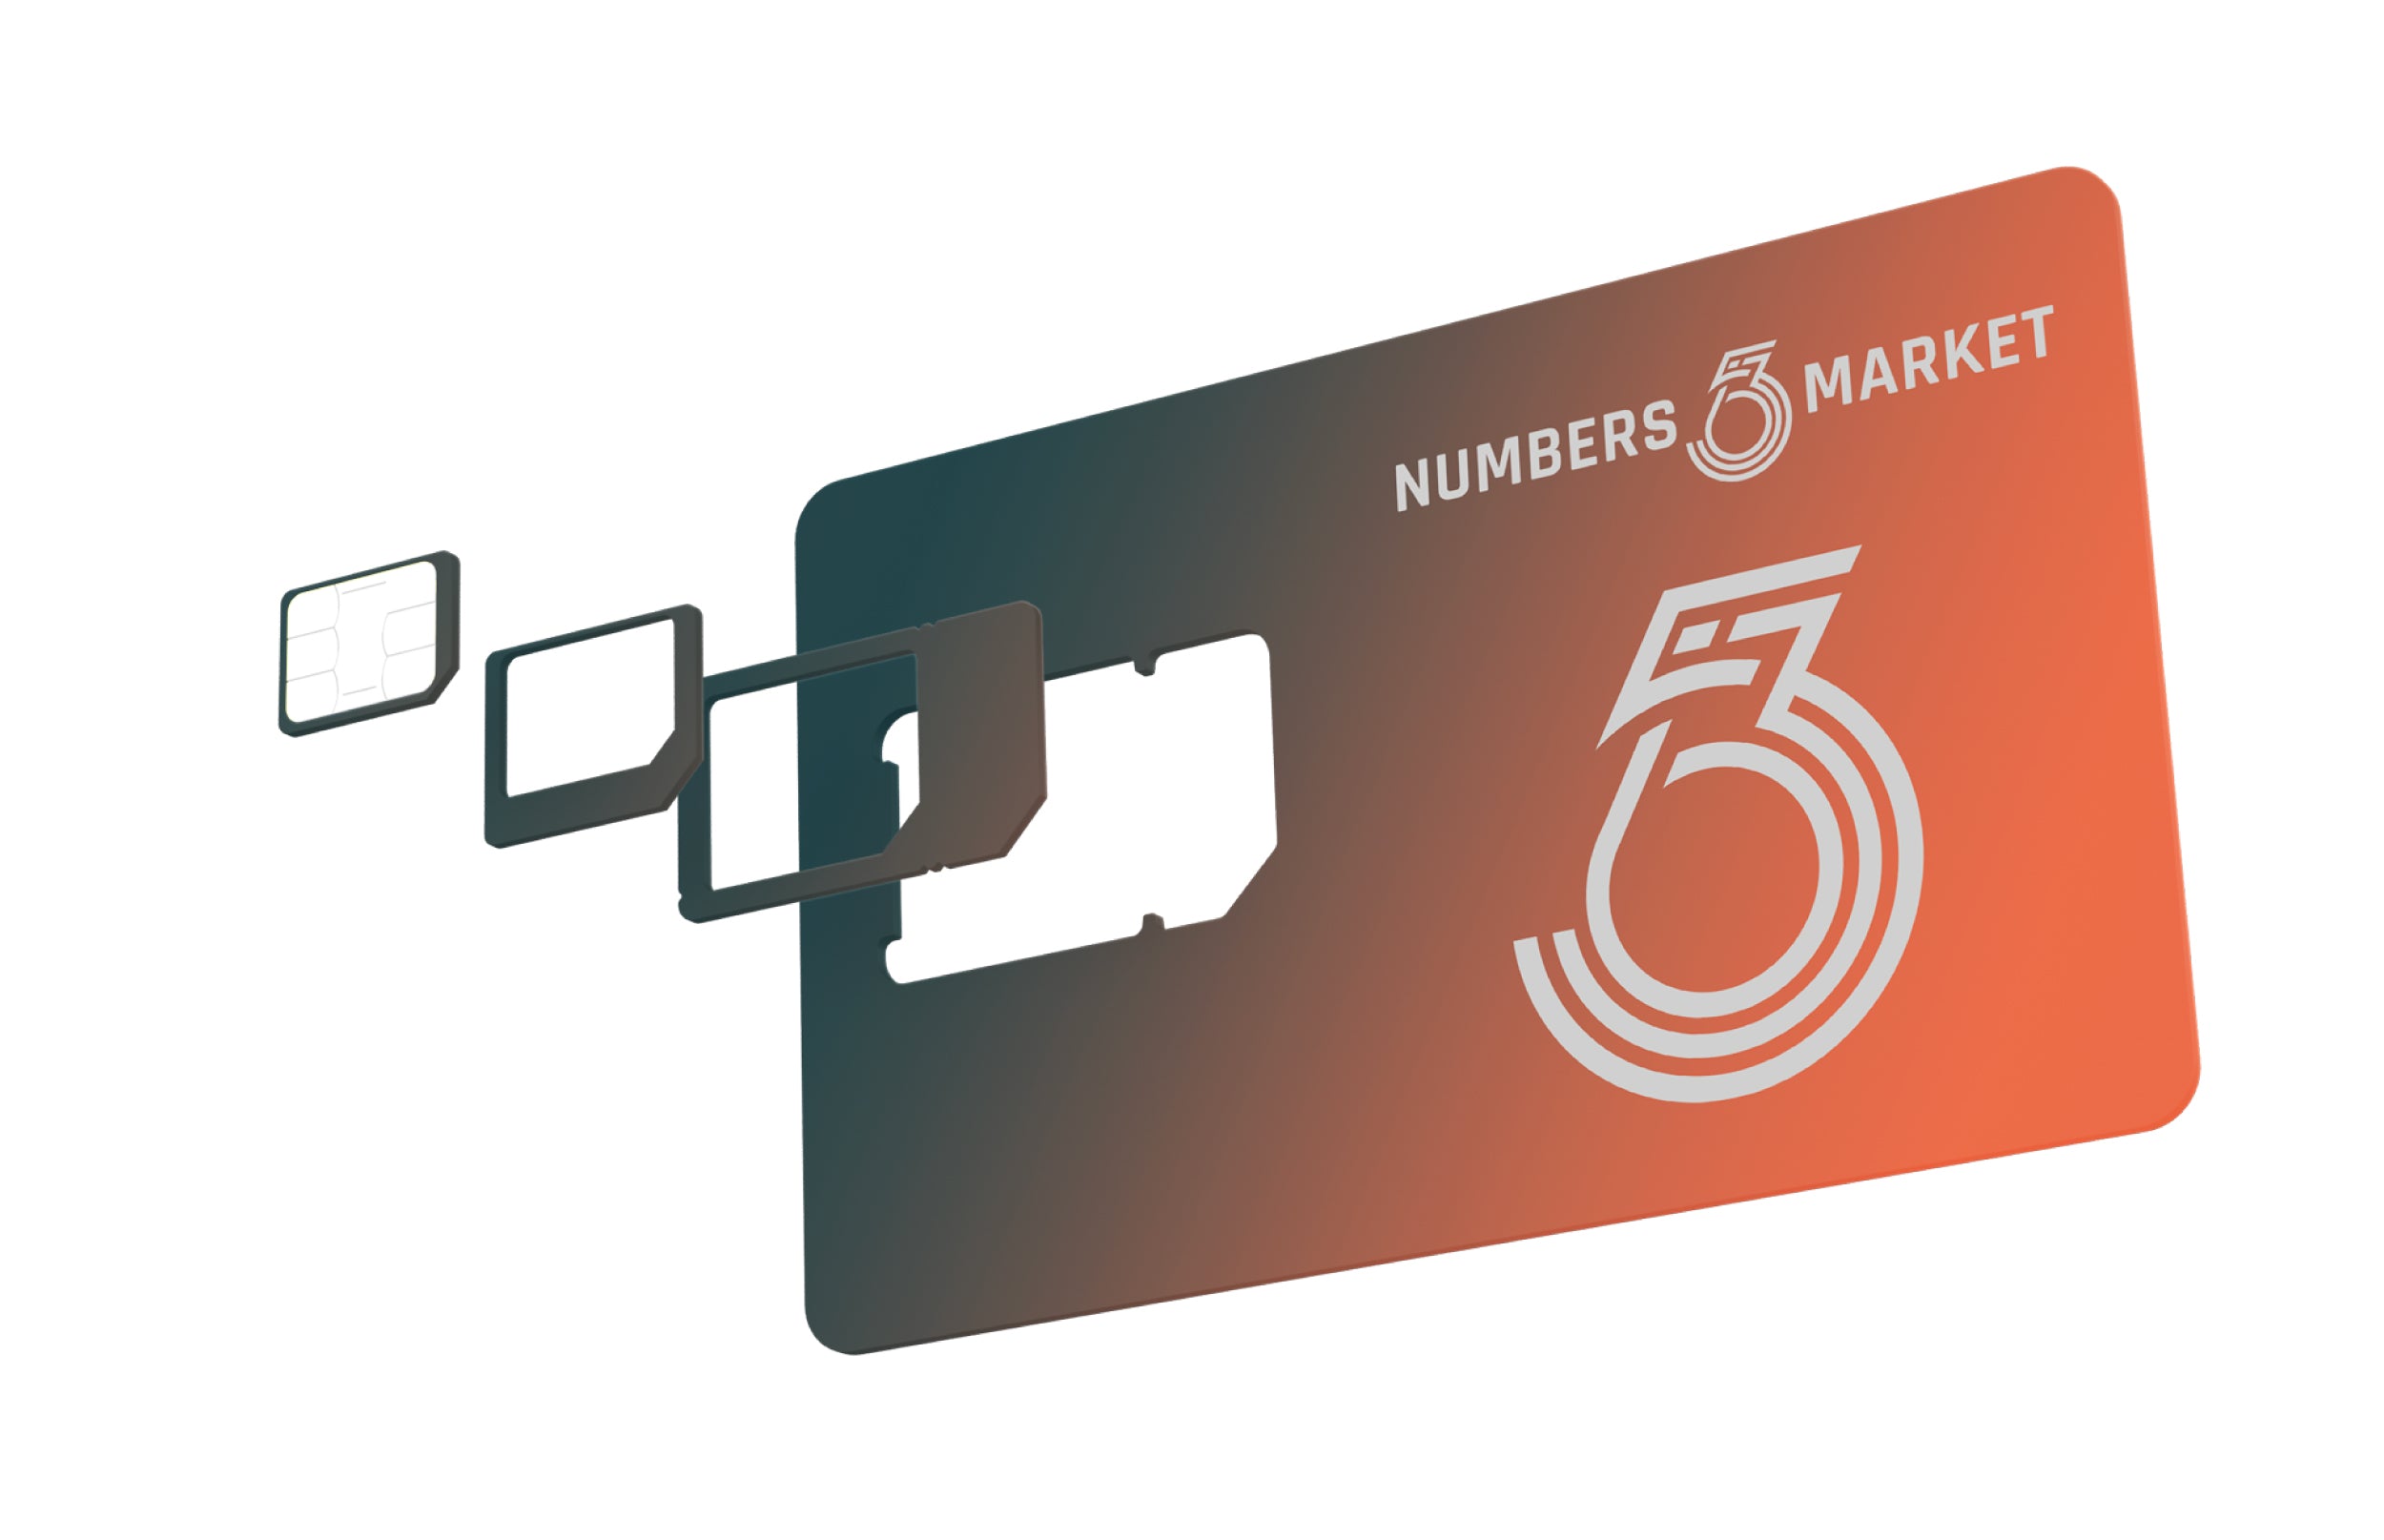 Bespoke mobile numbers service, Allows you to create your own mobile in four simple steps